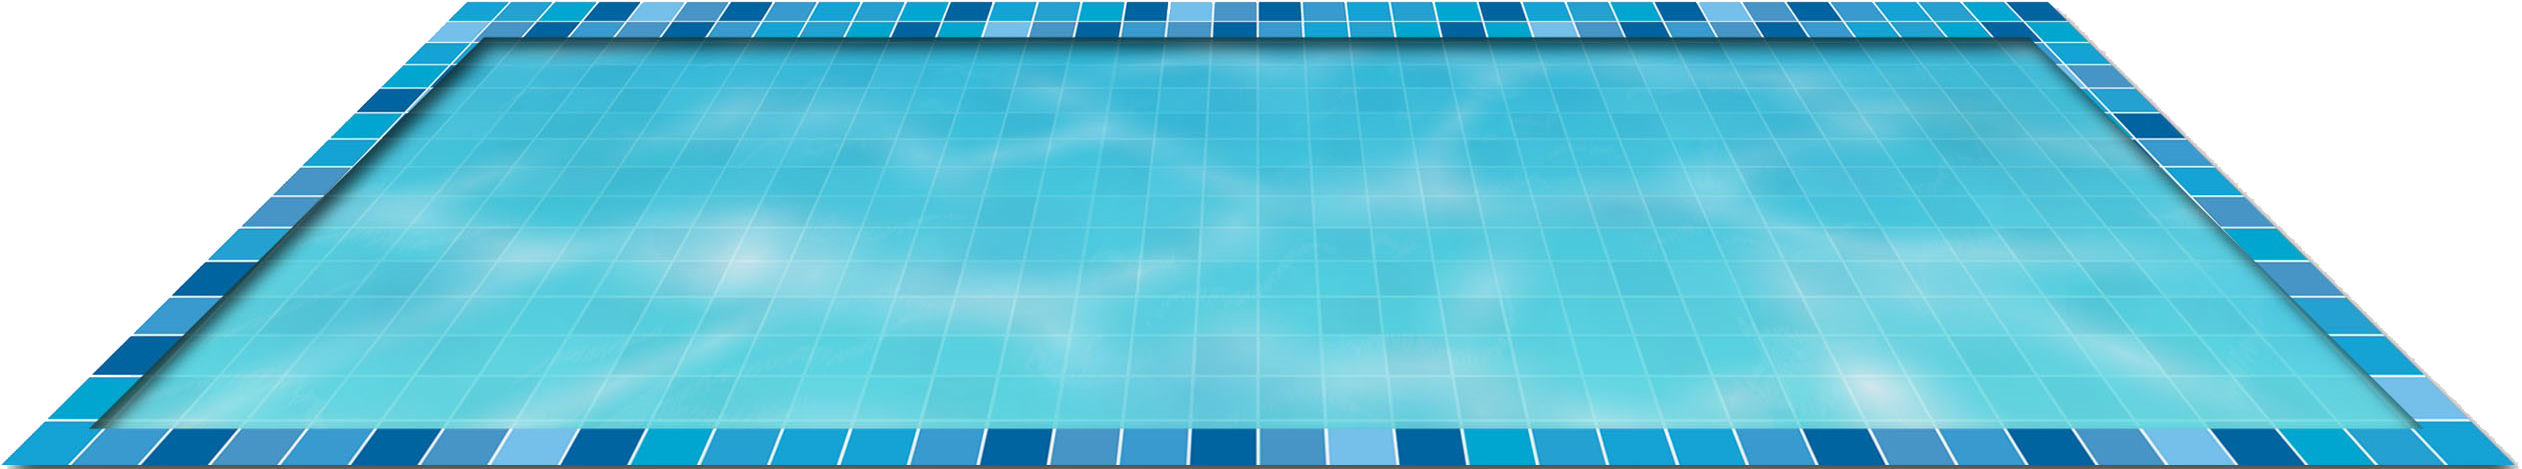 Commercial Swimming Pool PNG Image